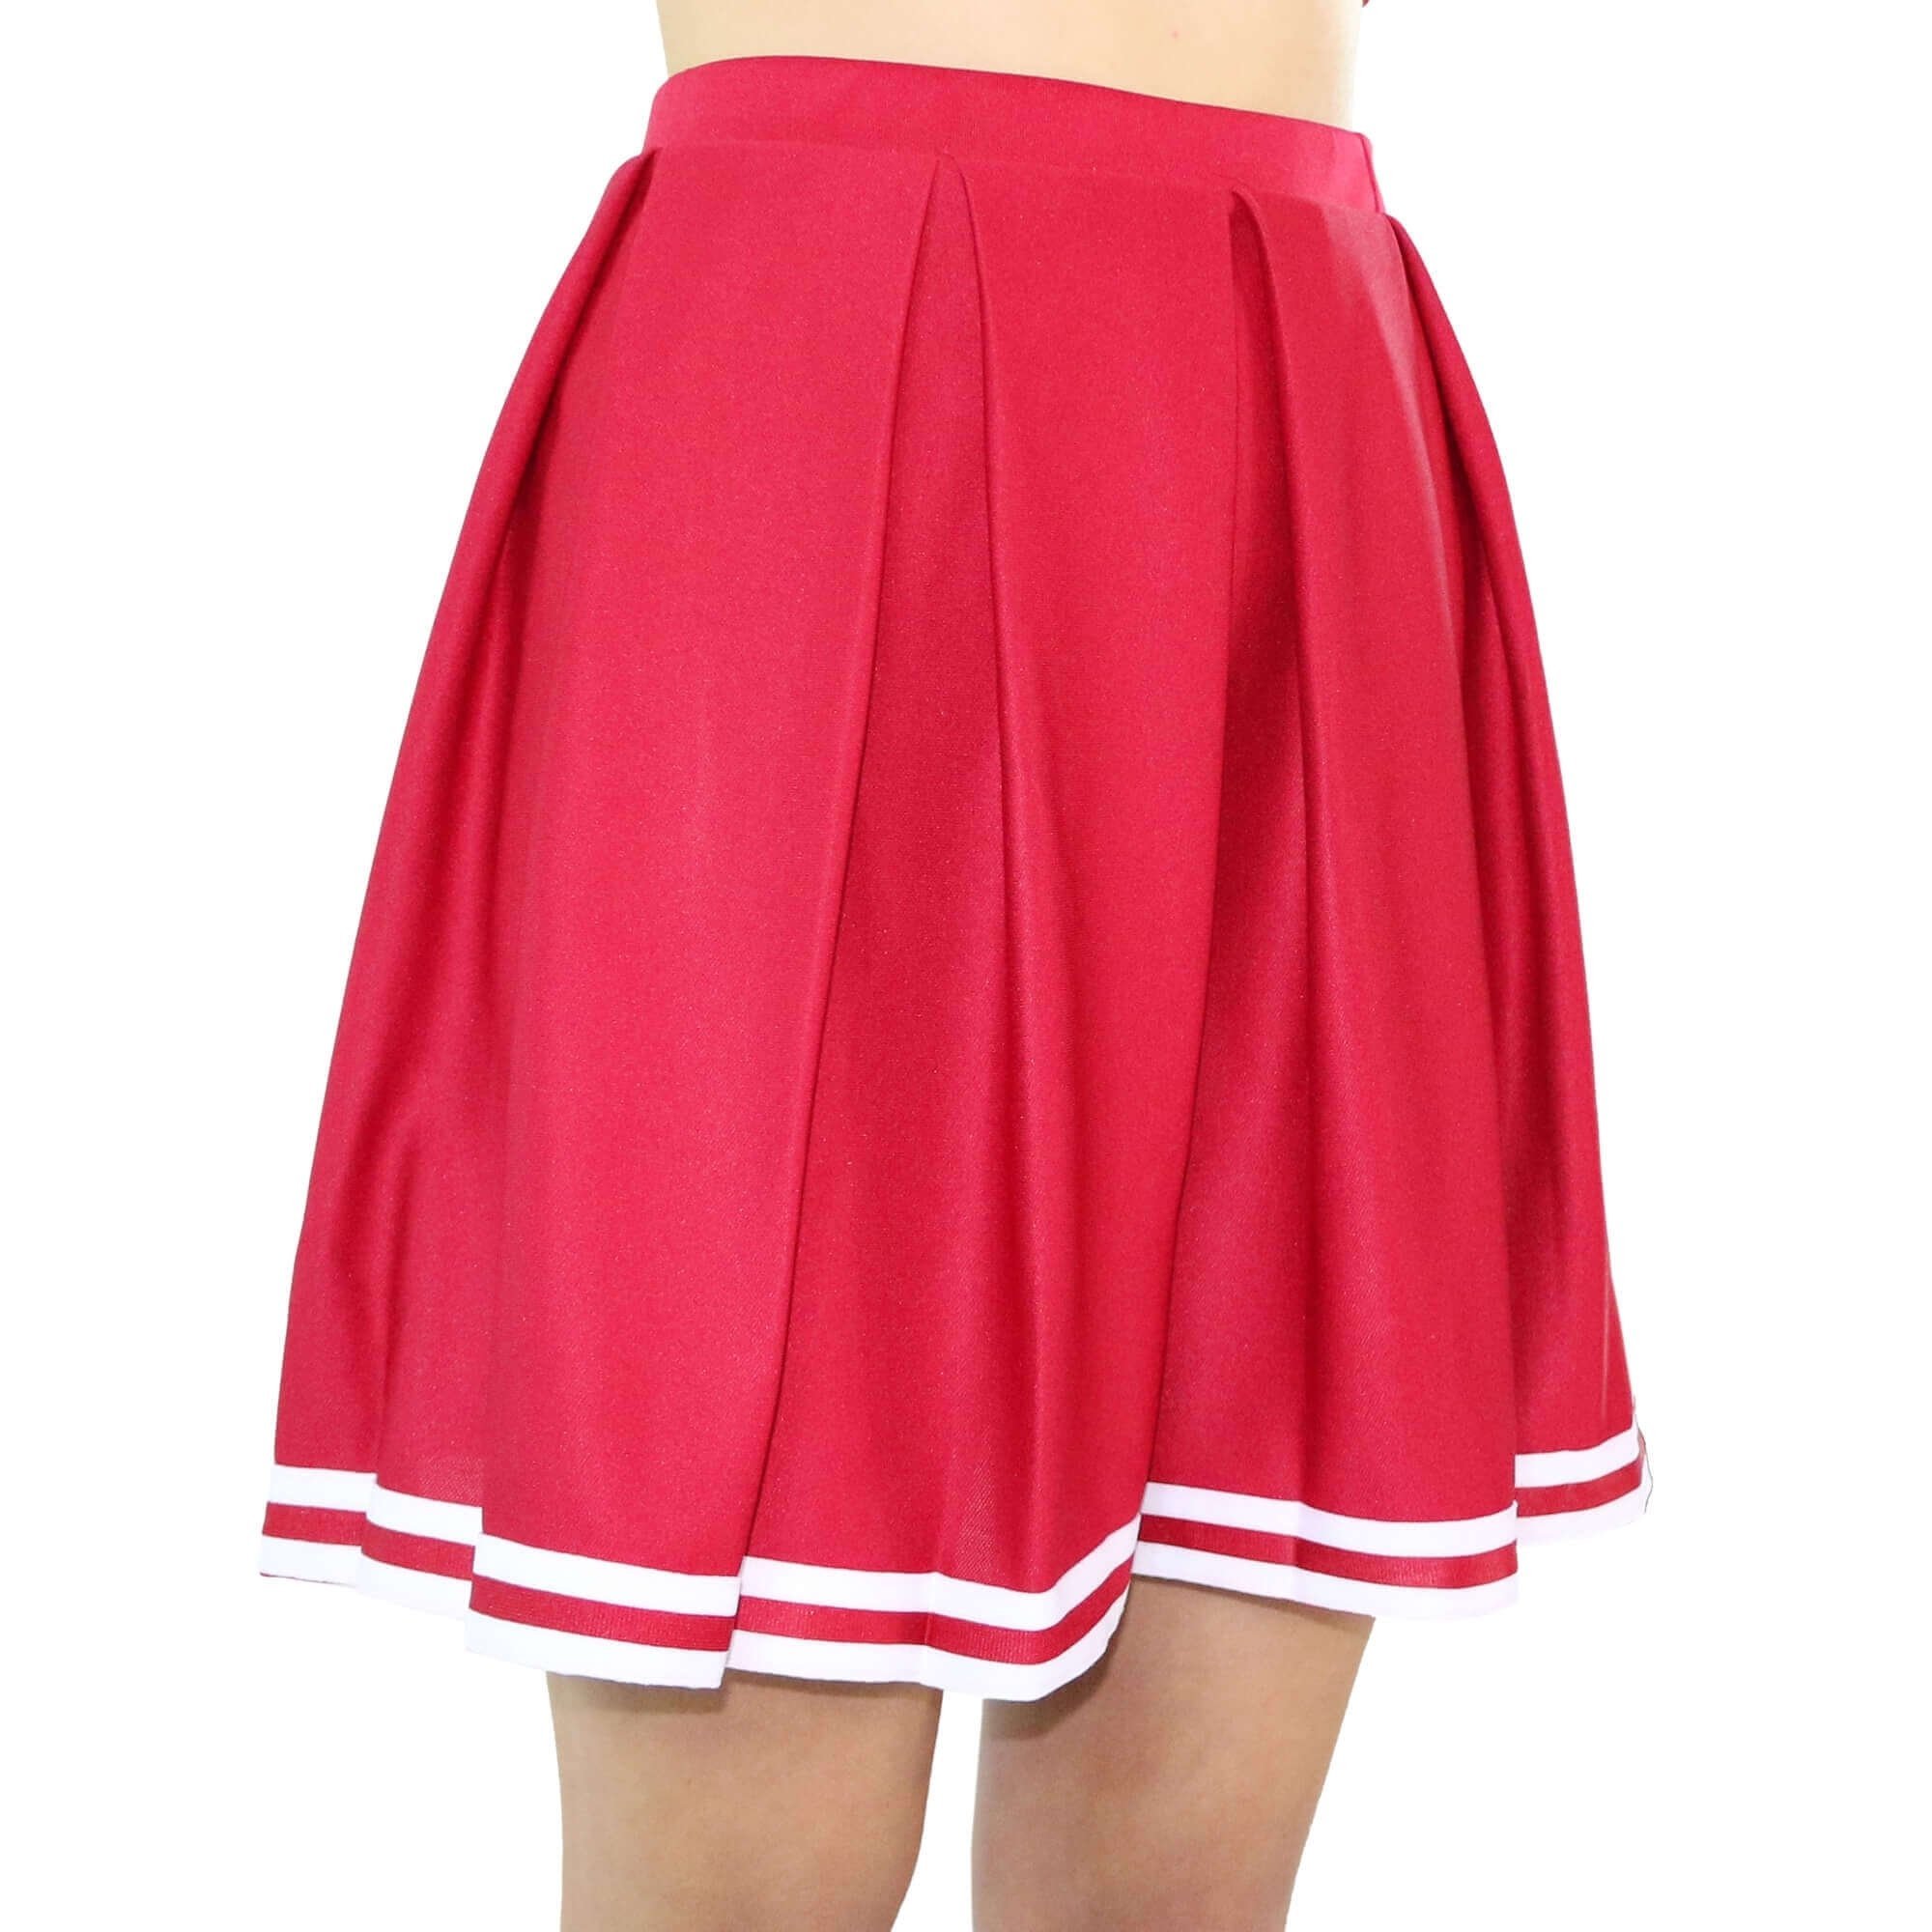 Danzcue Child Knit Pleat Cheerleading Skirt - Click Image to Close